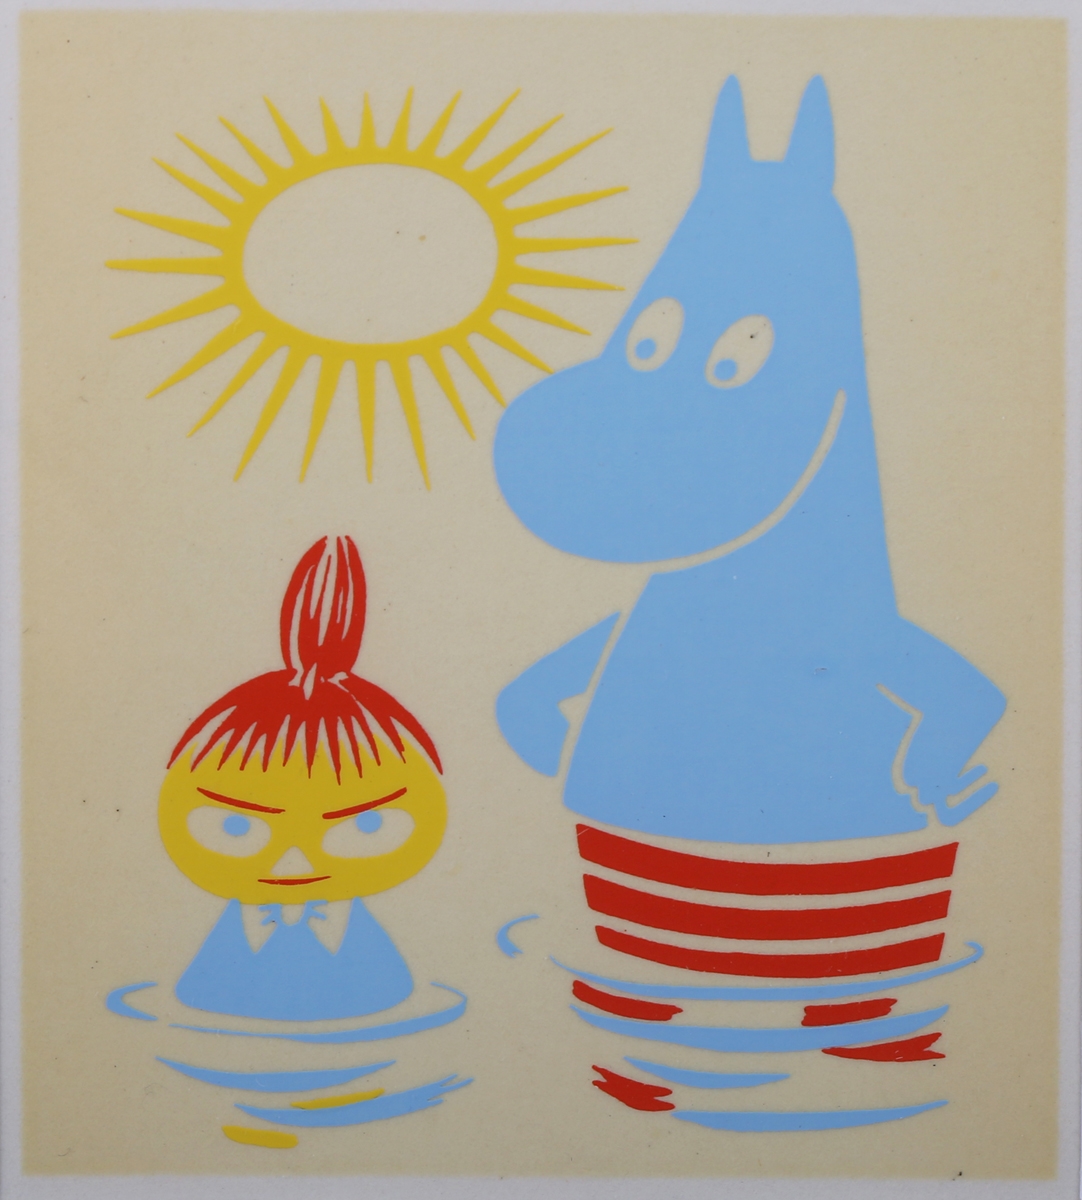 Tove Jansson – ‘Moomintroll & Little My by Tove Jansson, 1956